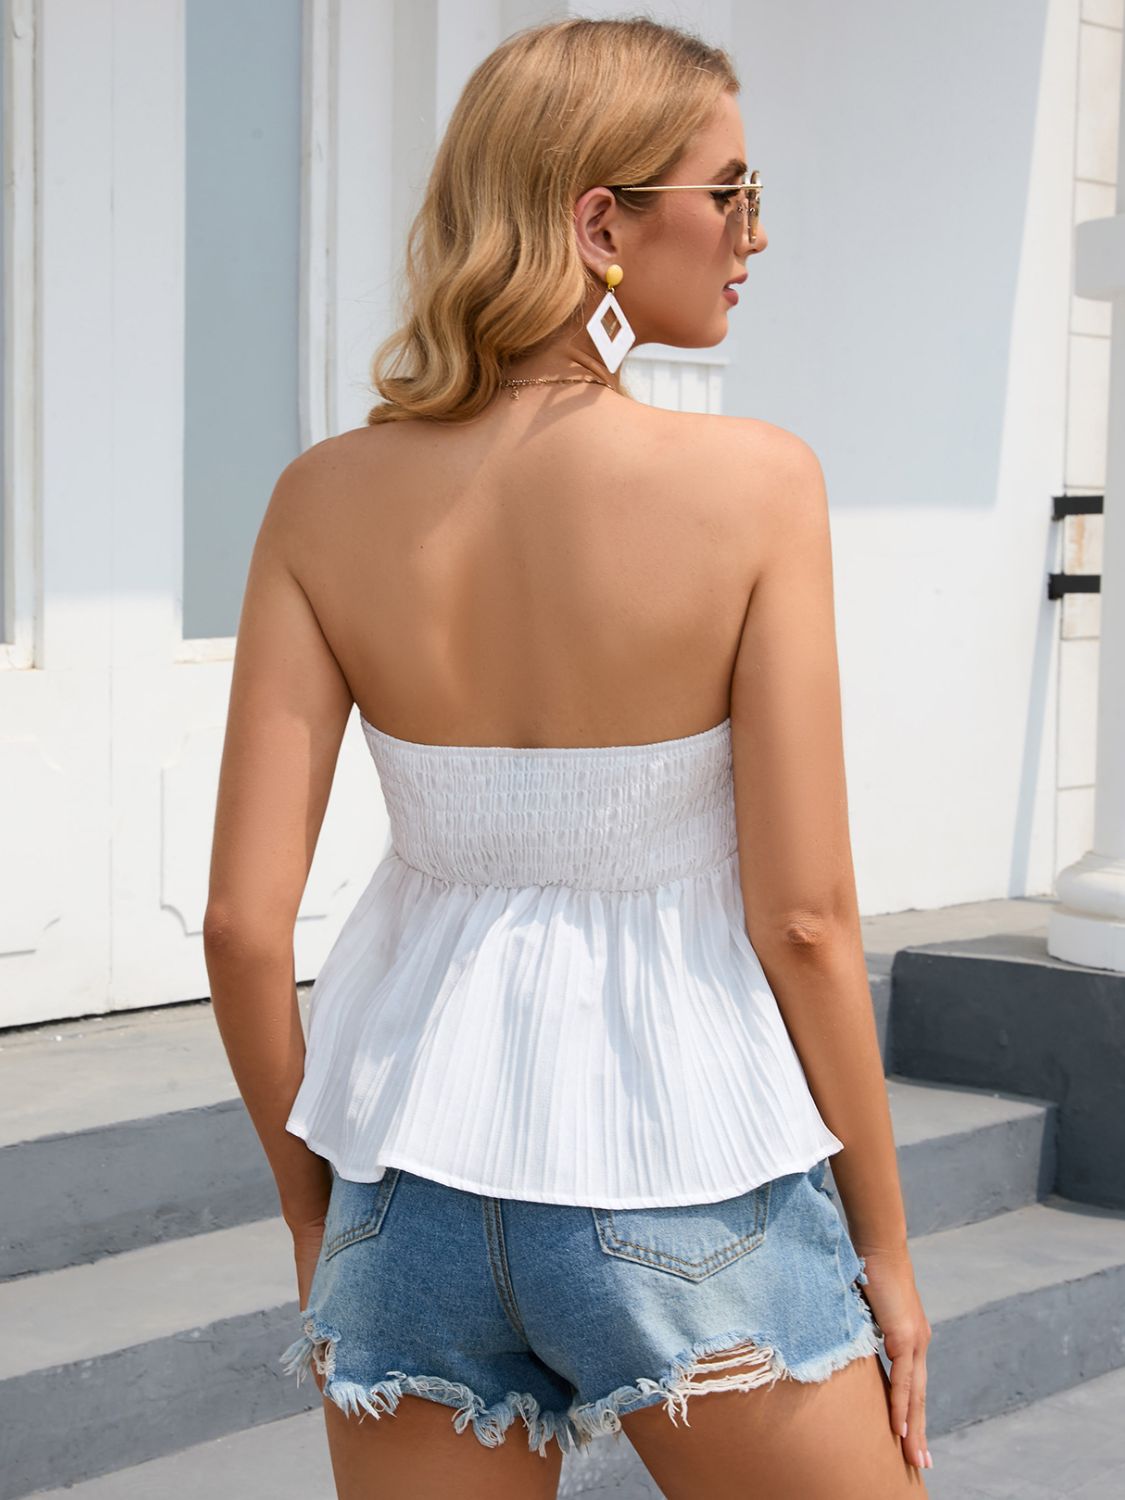 Waiting For You Strapless Peplum Top